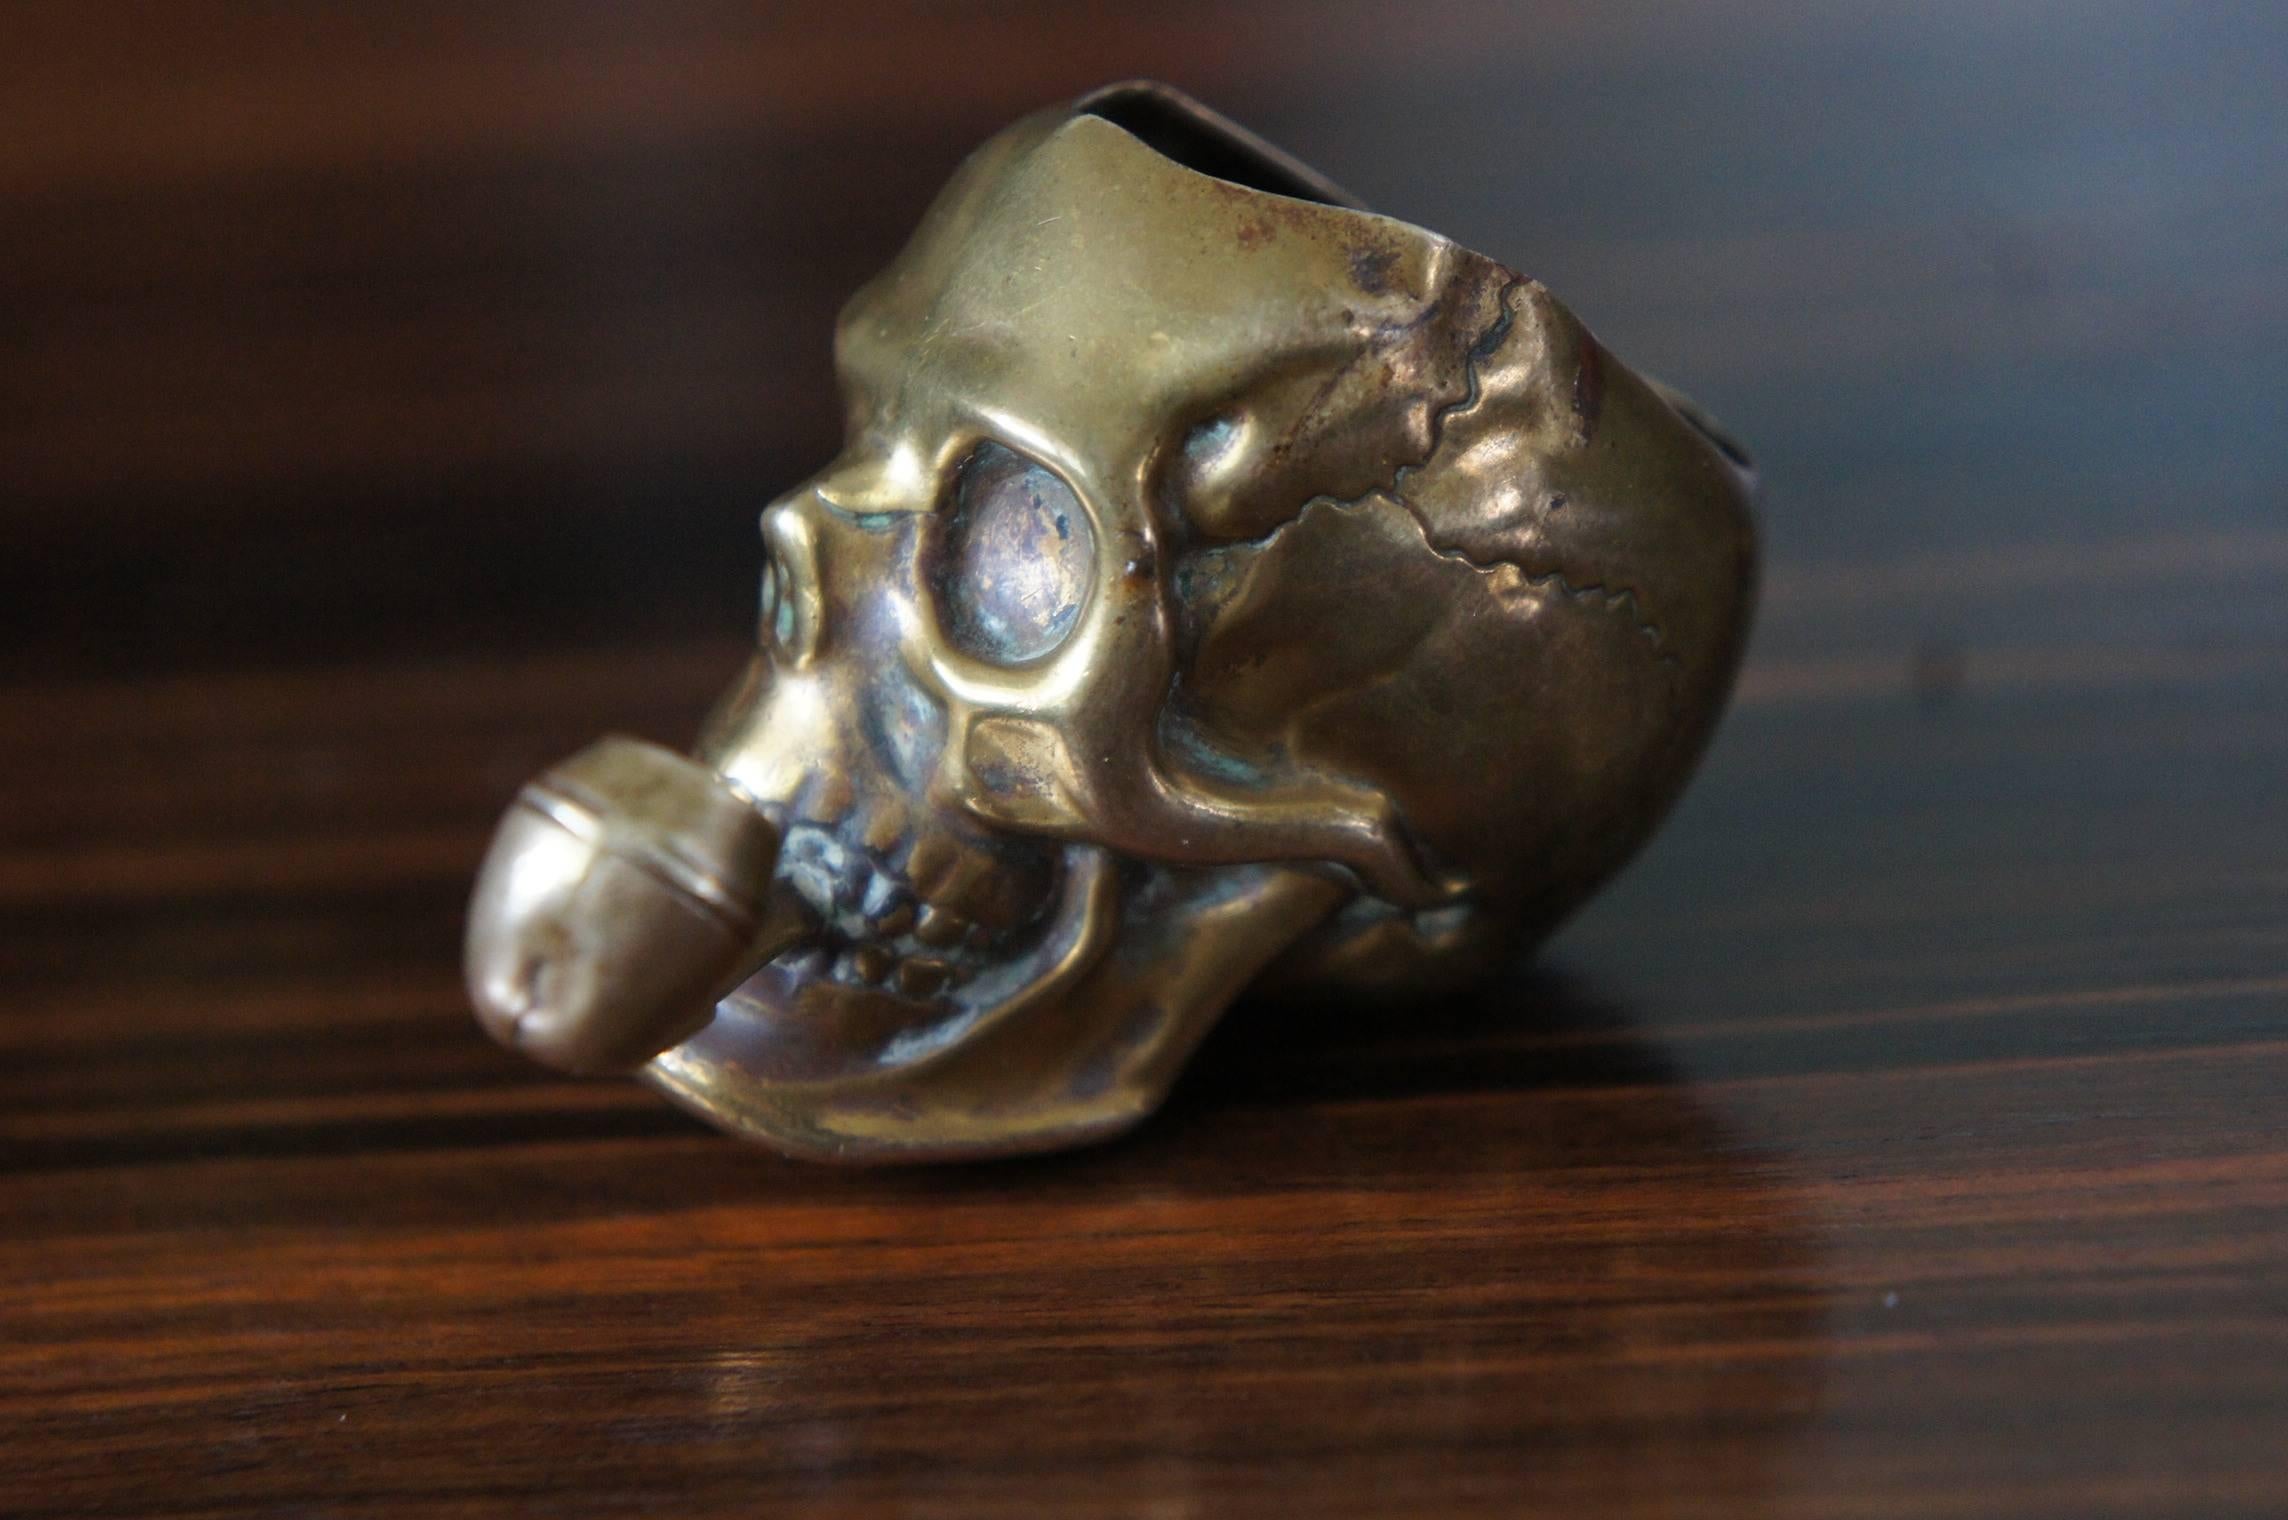 Unique smoking and death related desk piece from the late 1800s.

This antique, pipe smoking skull makes a great display piece. It may be small in size, but that is almost always the case with antique vesta cases. This fine and possibly unique